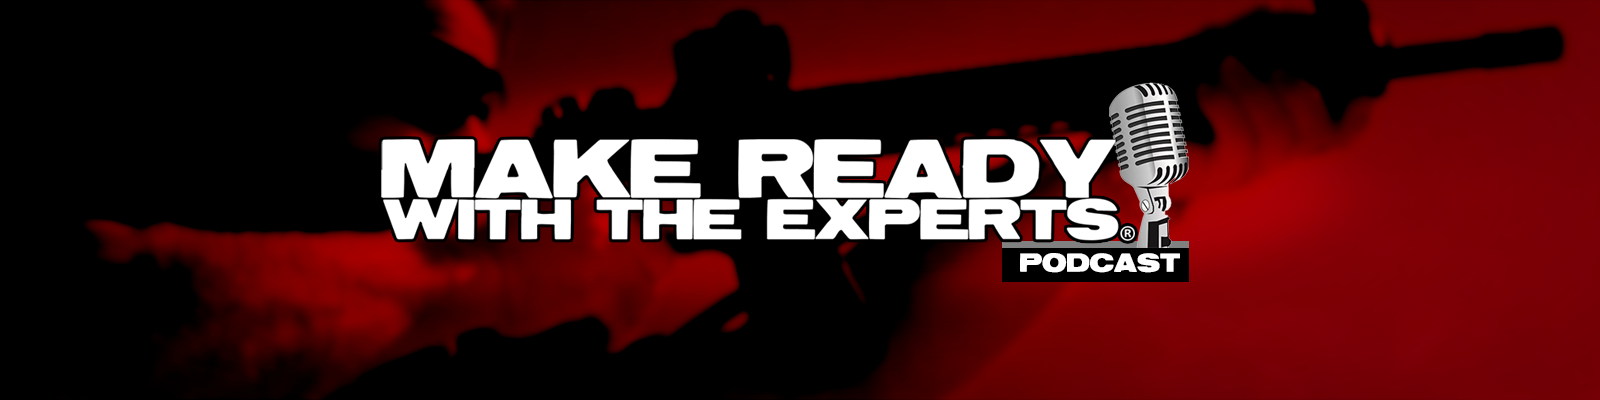 Make Ready with the Experts